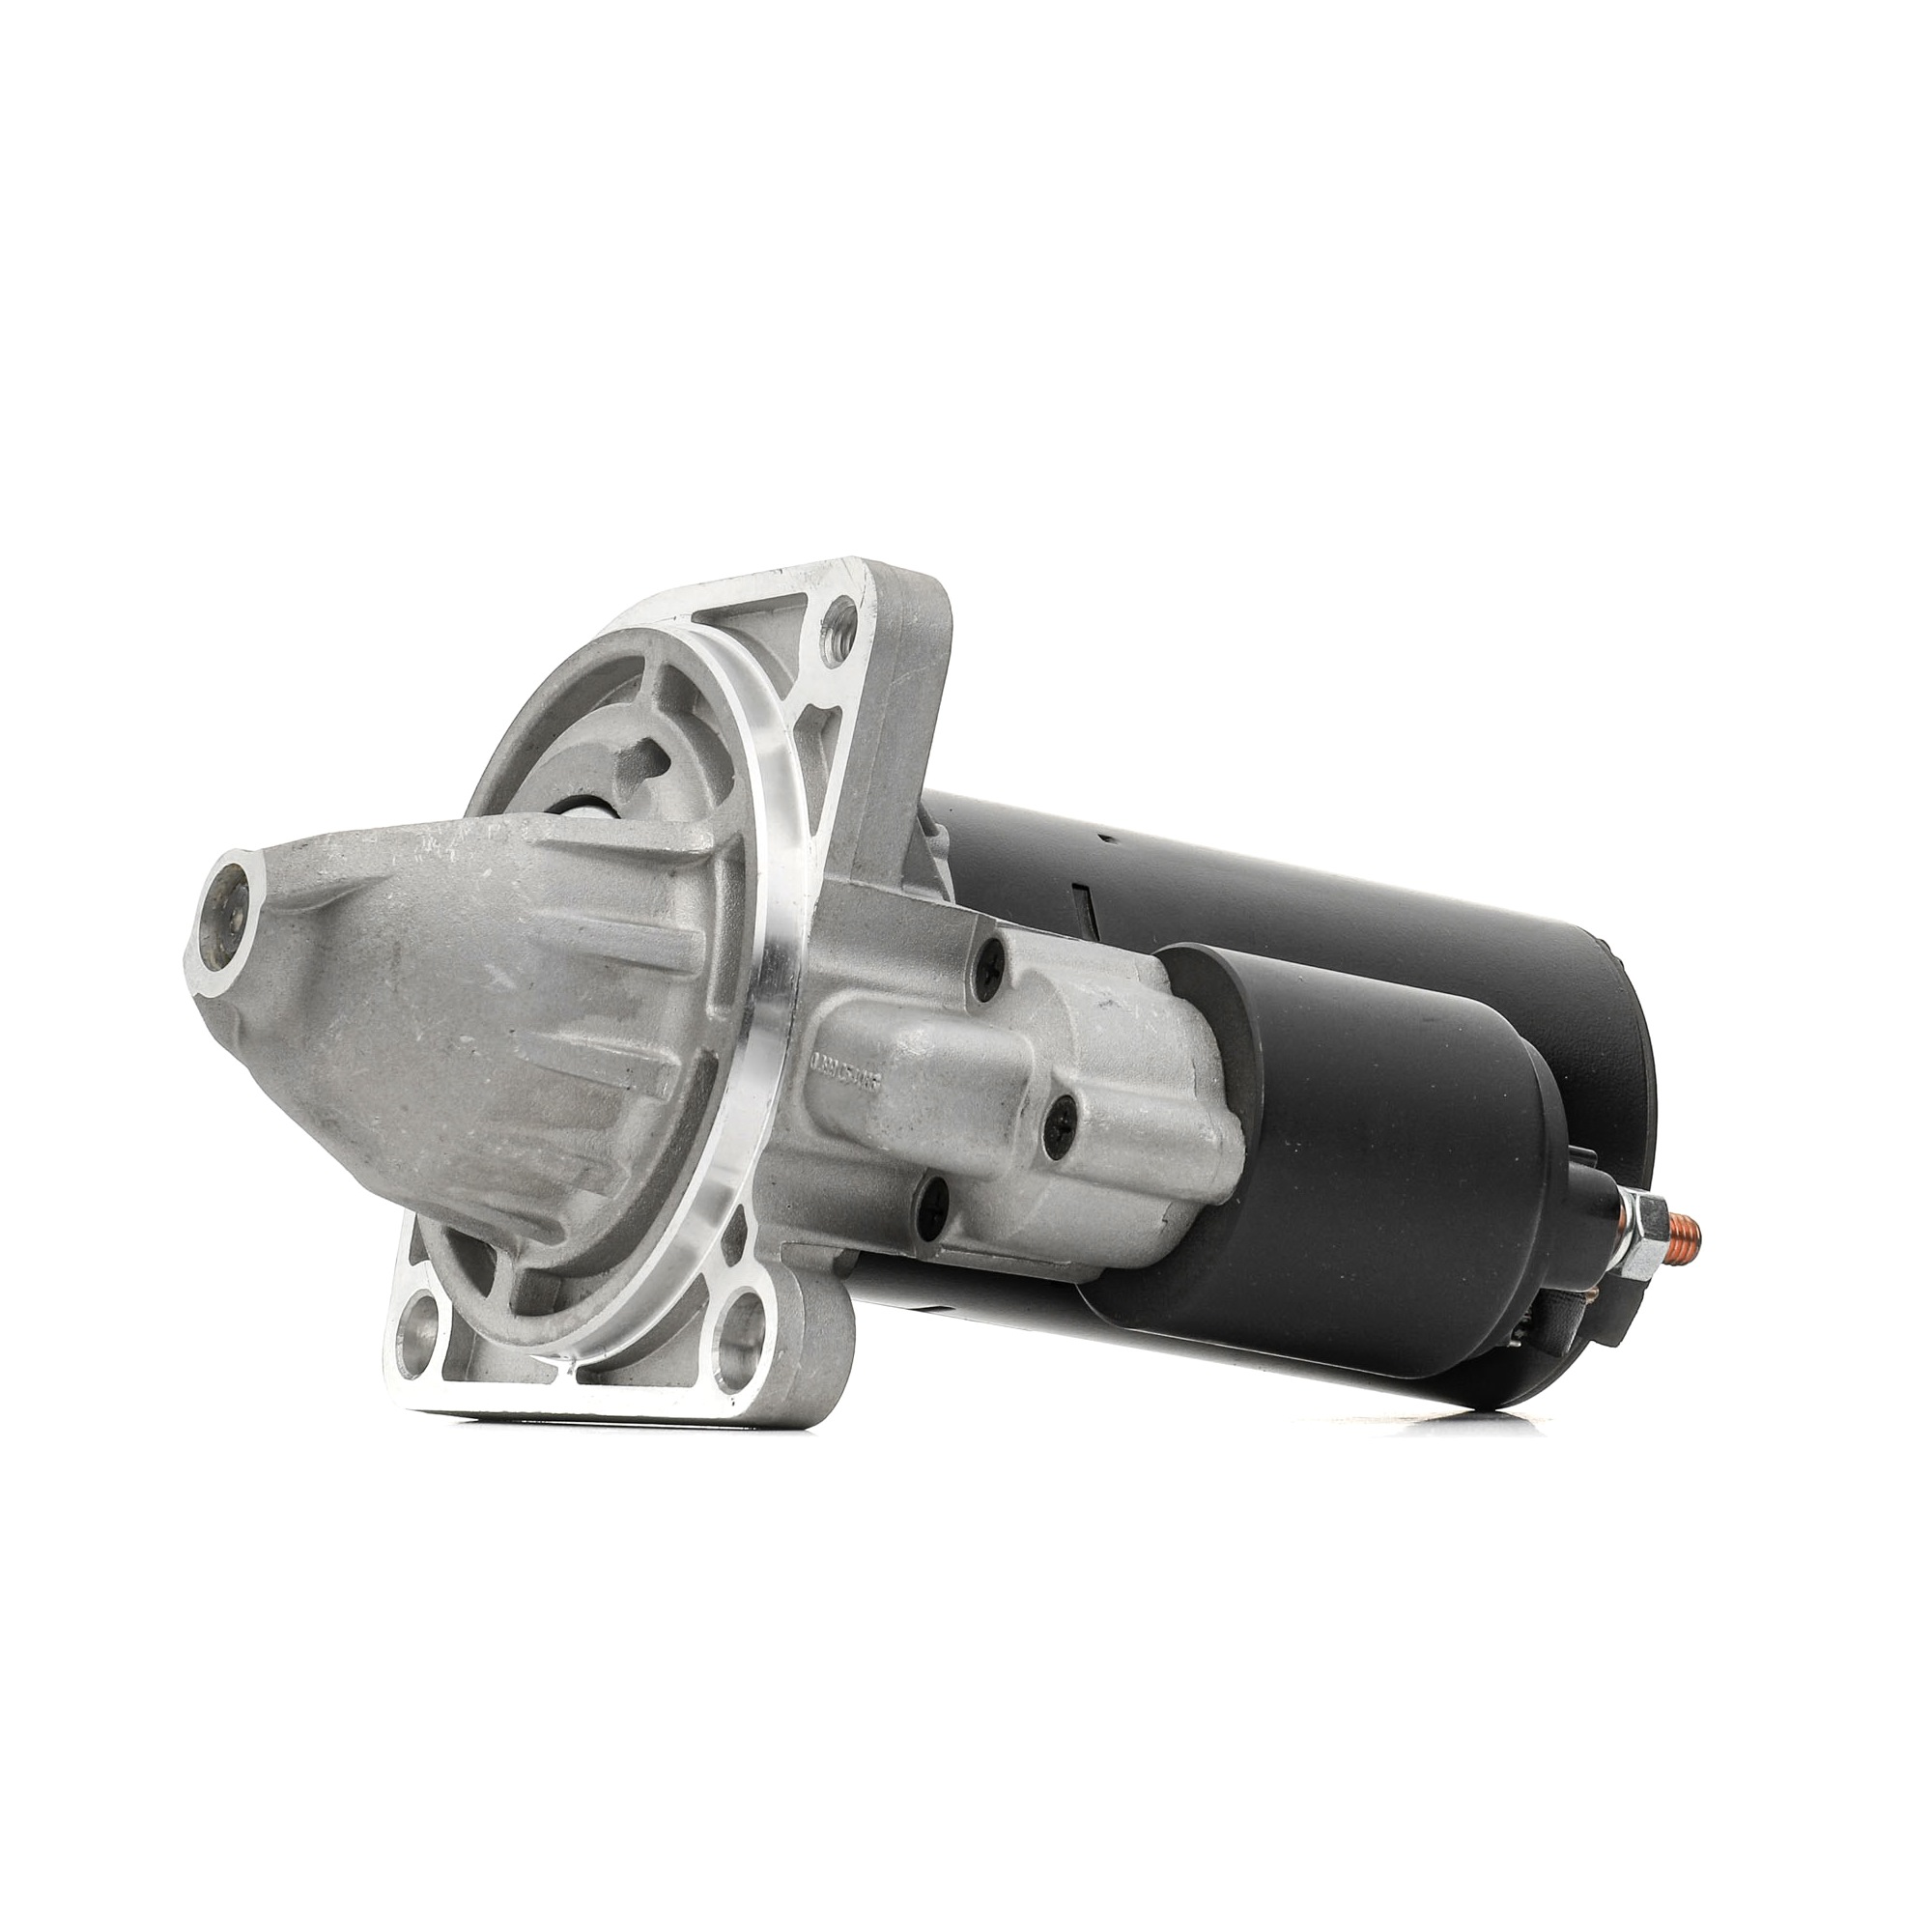 Iveco Starter motor BOSCH 1 986 S00 738 at a good price